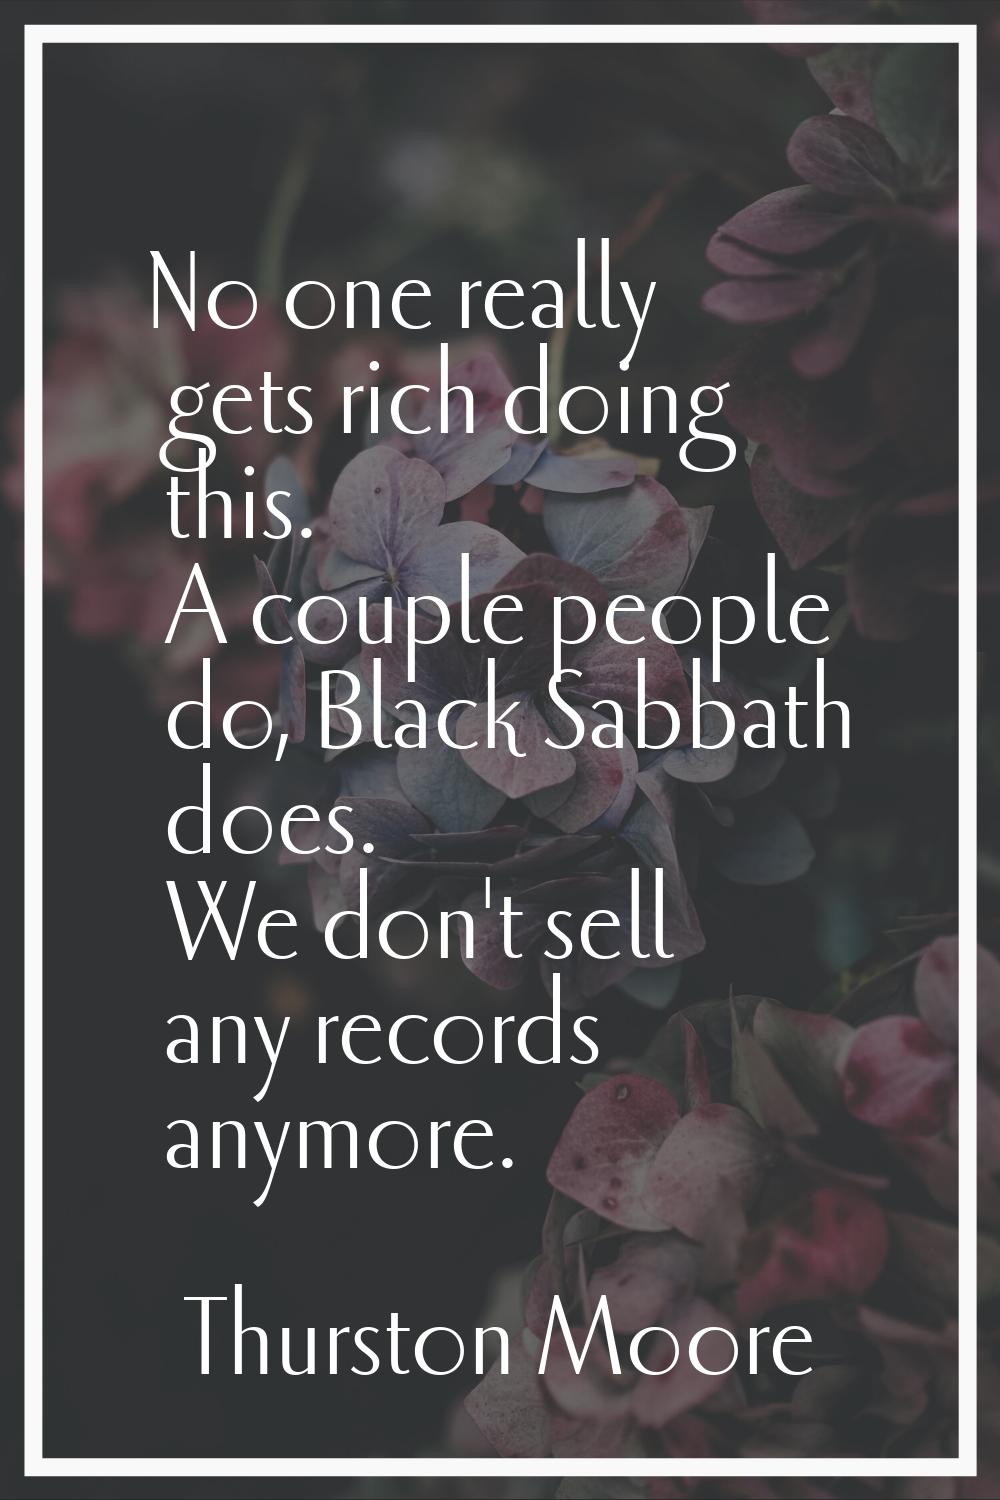 No one really gets rich doing this. A couple people do, Black Sabbath does. We don't sell any recor